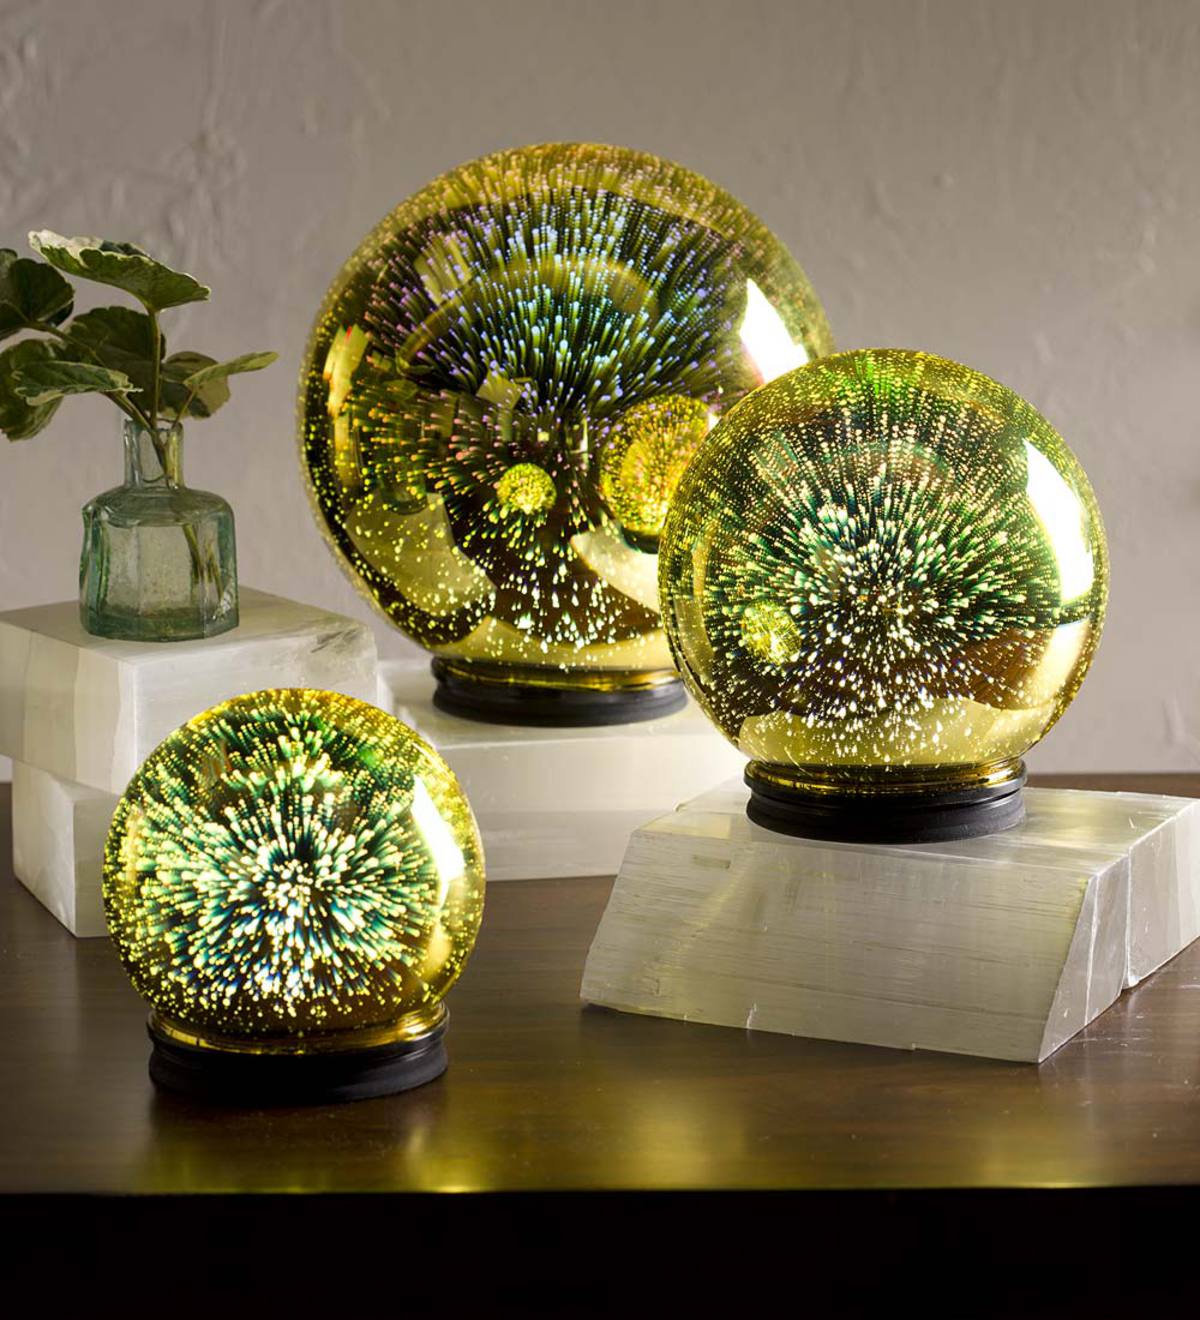 3D Lighted Mercury Glass Balls, Set of 3 - Free 2 Day Amazon Delivery - Yellow